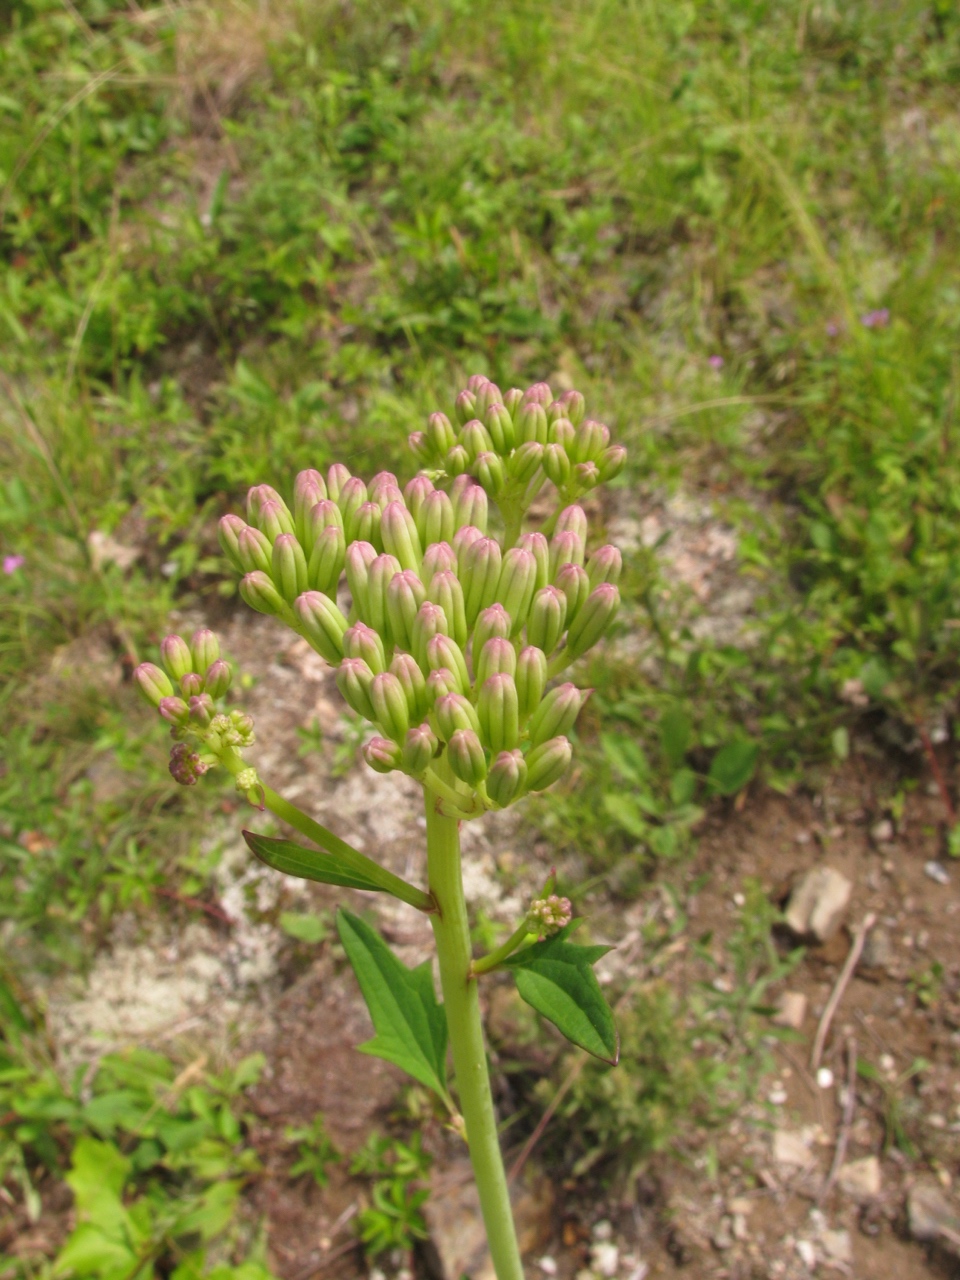 The Scientific Name is Arnoglossum atriplicifolium [= Cacalia atriplicifolia]. You will likely hear them called Pale Indian-plantain. This picture shows the Pink flower buds in July of Arnoglossum atriplicifolium [= Cacalia atriplicifolia]